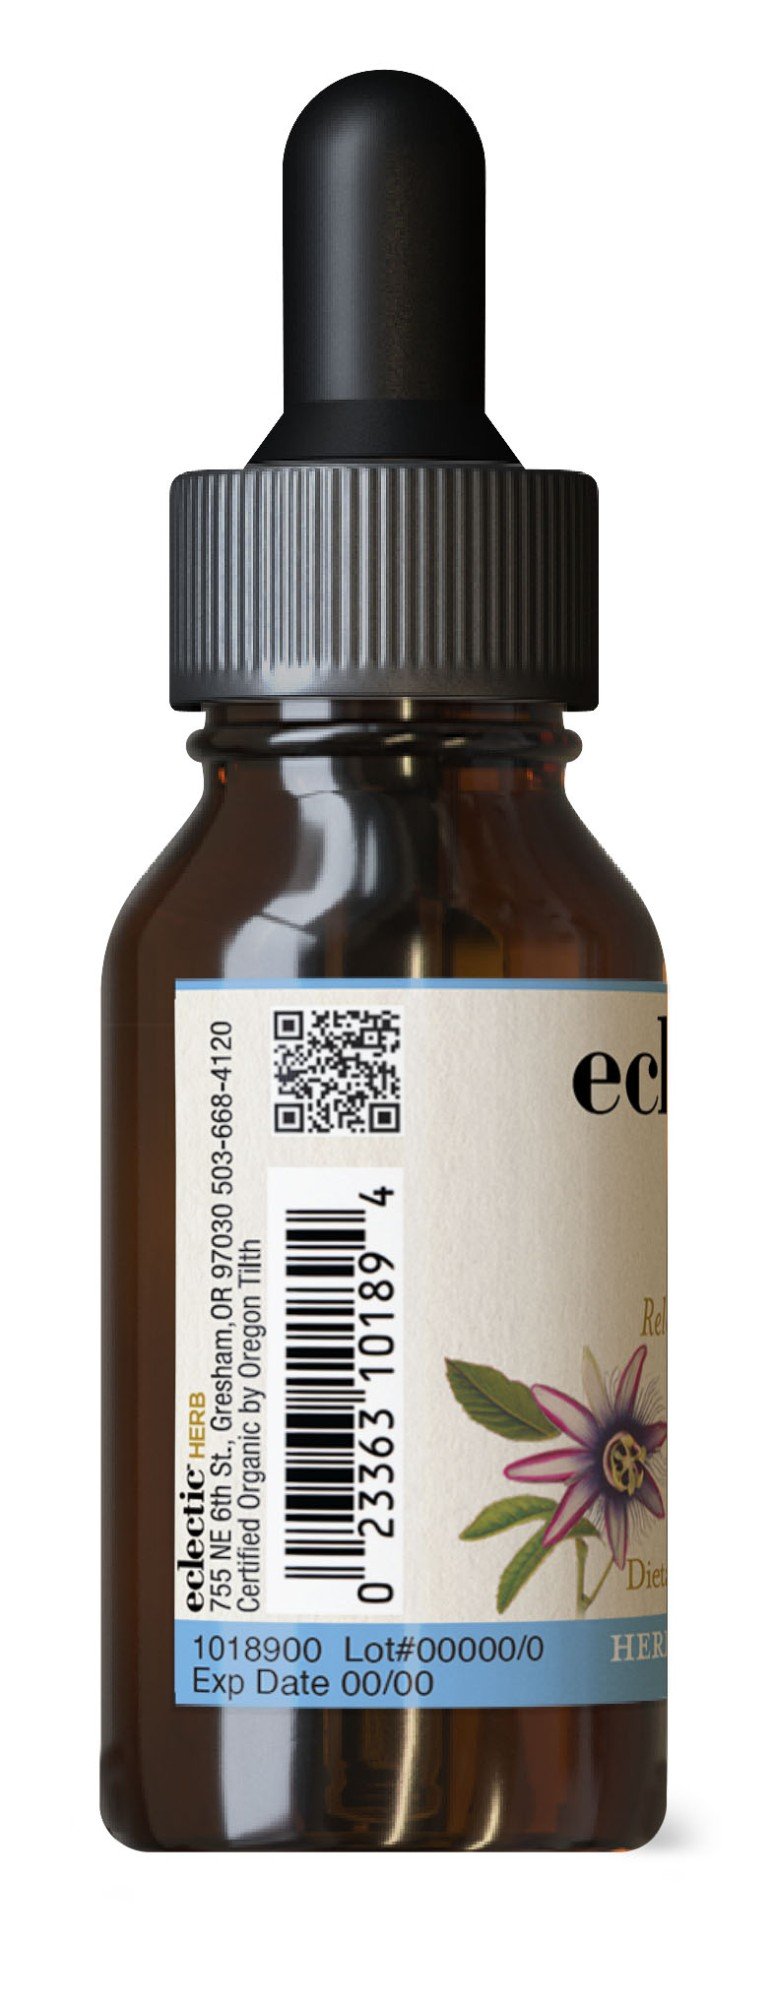 Eclectic Herb Passion Flower Extract 1 oz Liquid